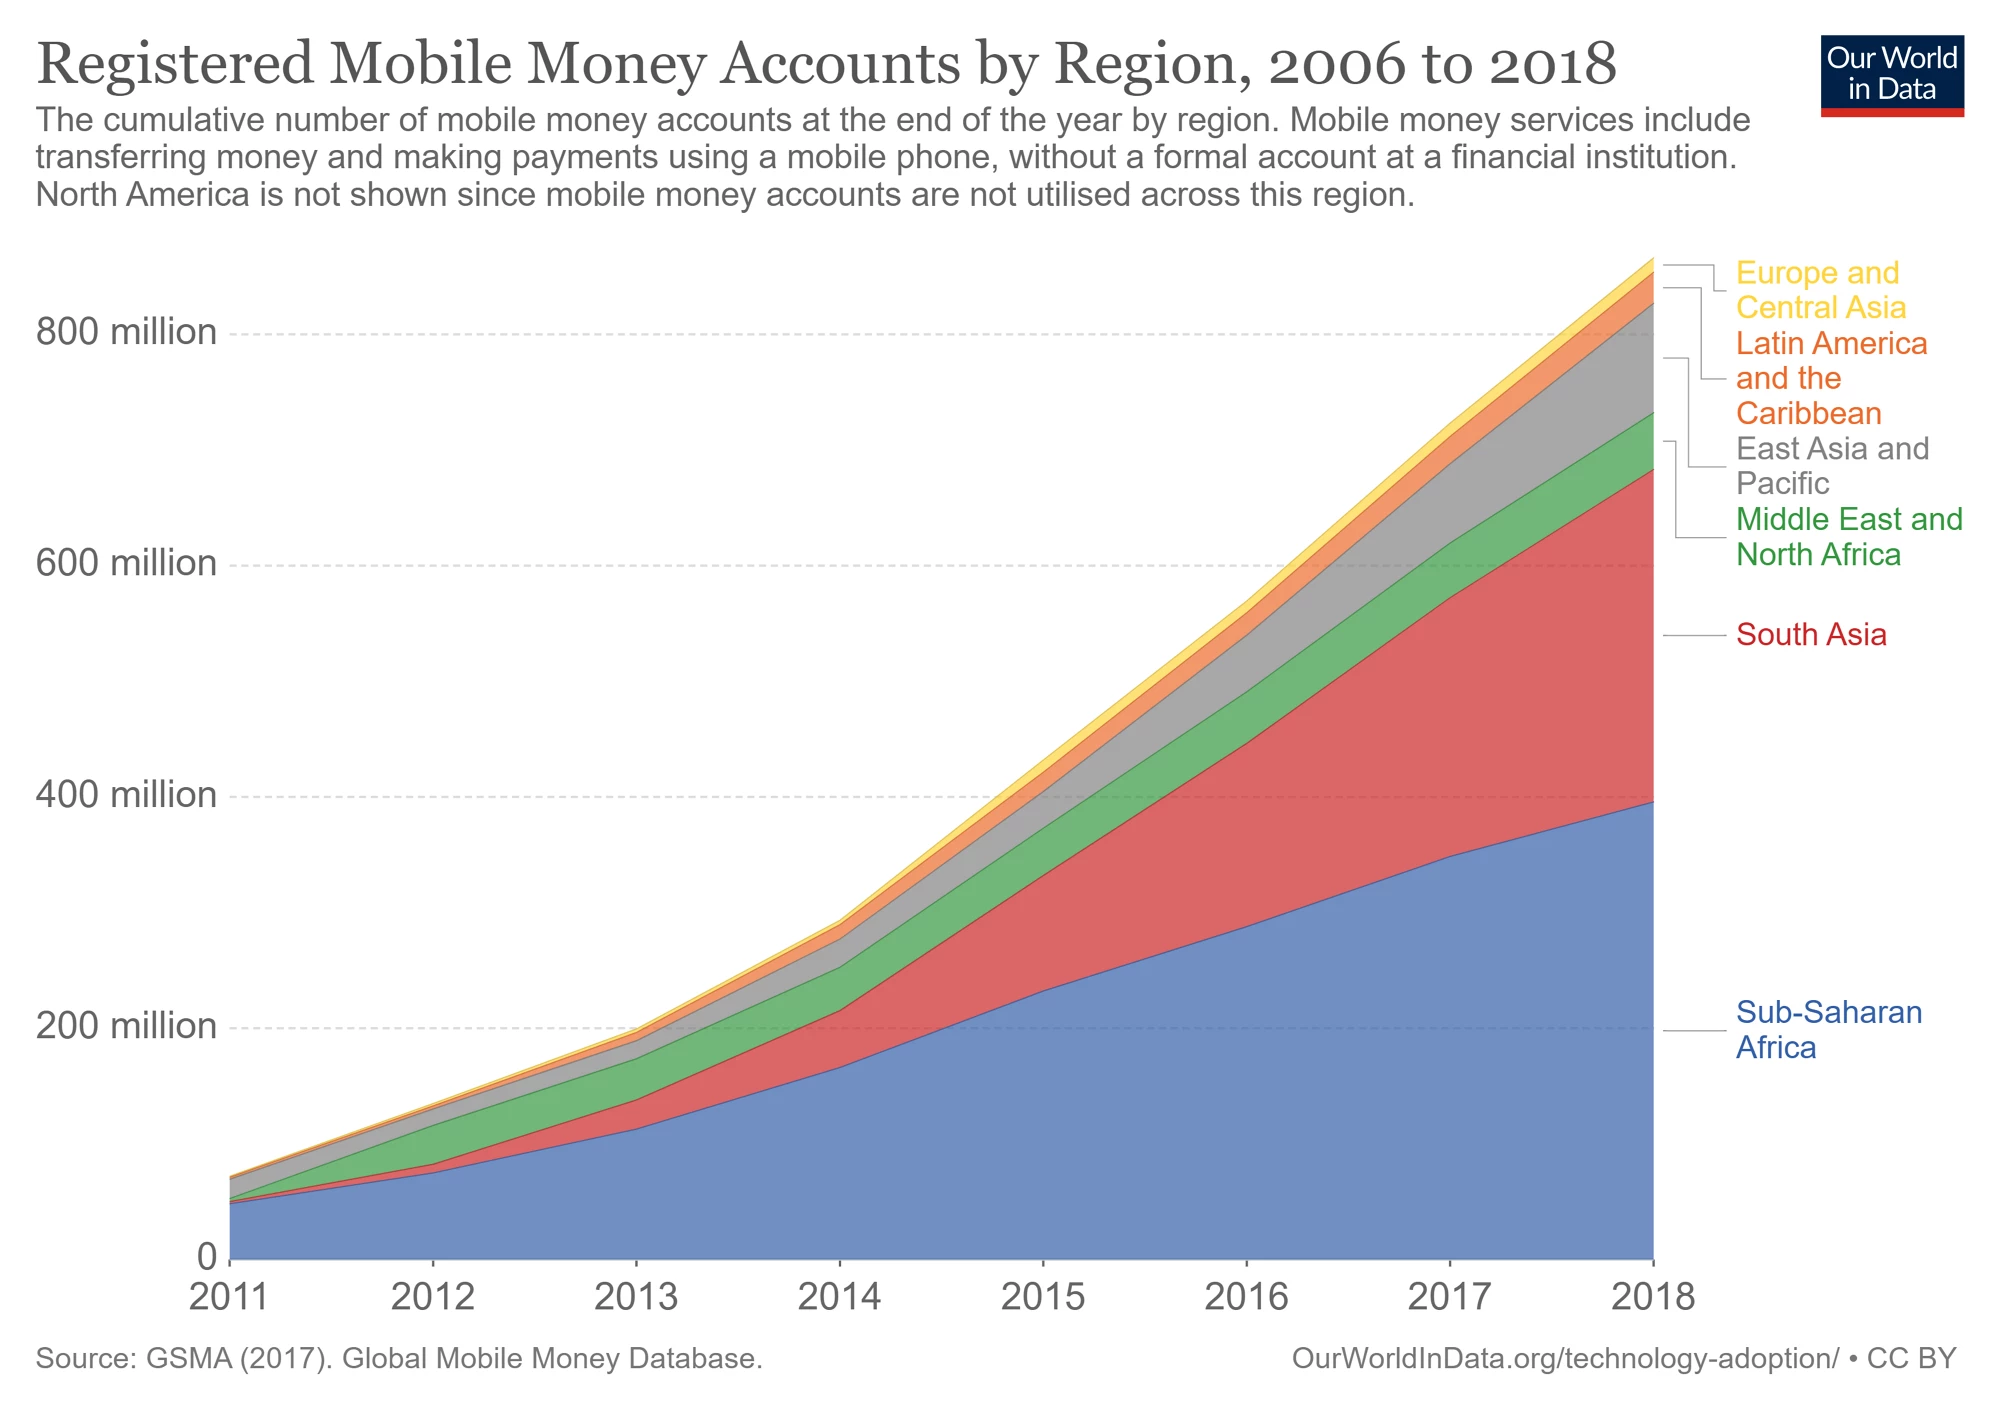 Registered Mobile Money Accounts by Region, 2006 to 2018